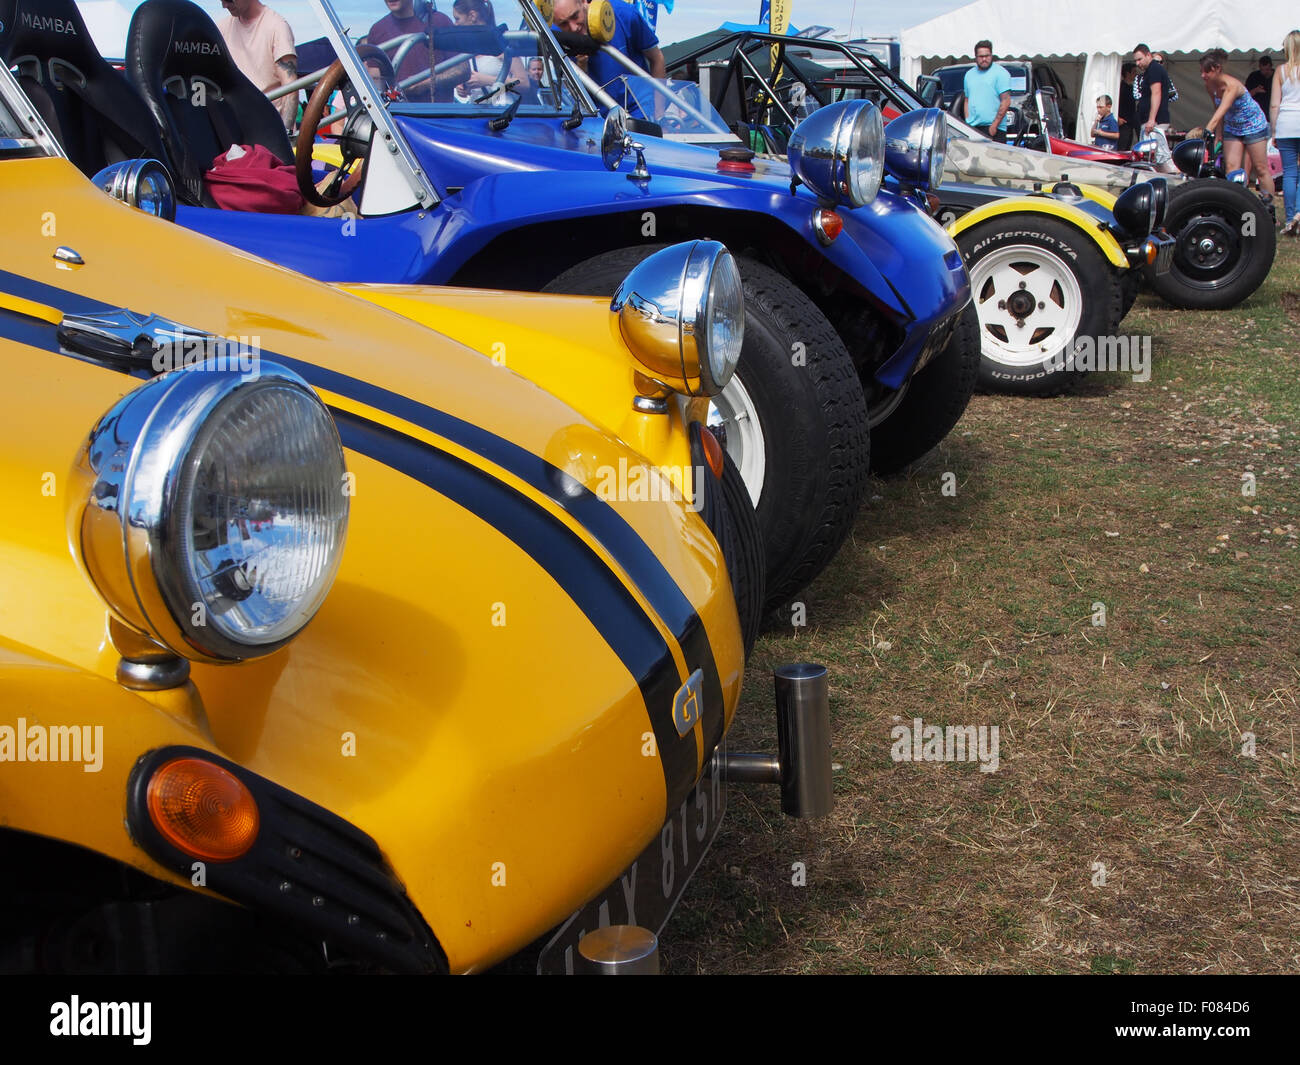 A customised road worthy beach buggy on display at a vehicle rally Stock Photo